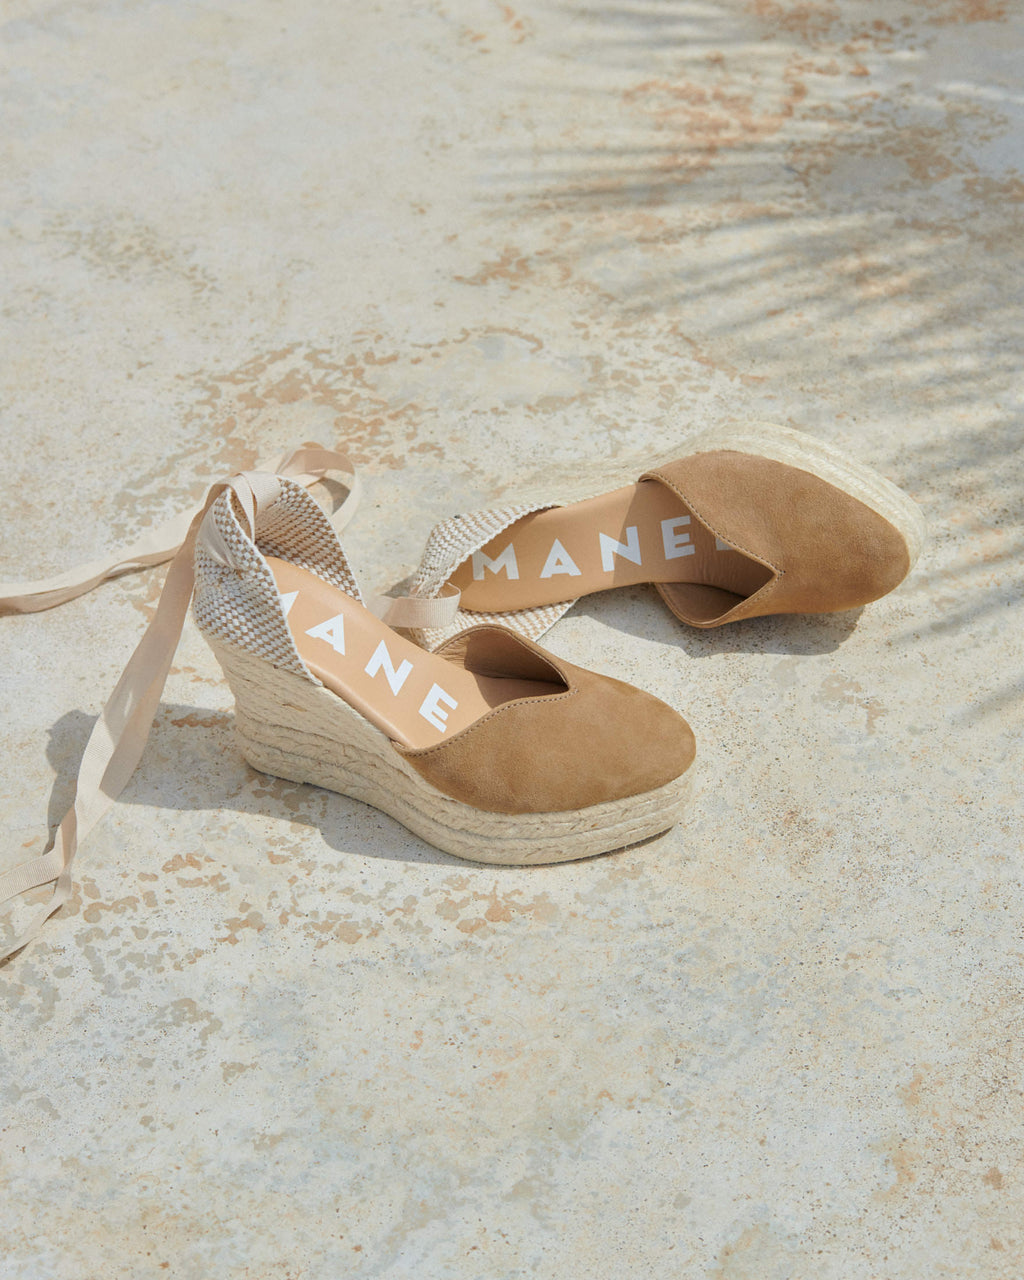 Heart-Shaped Wedges Sandals - Vintage Taupe